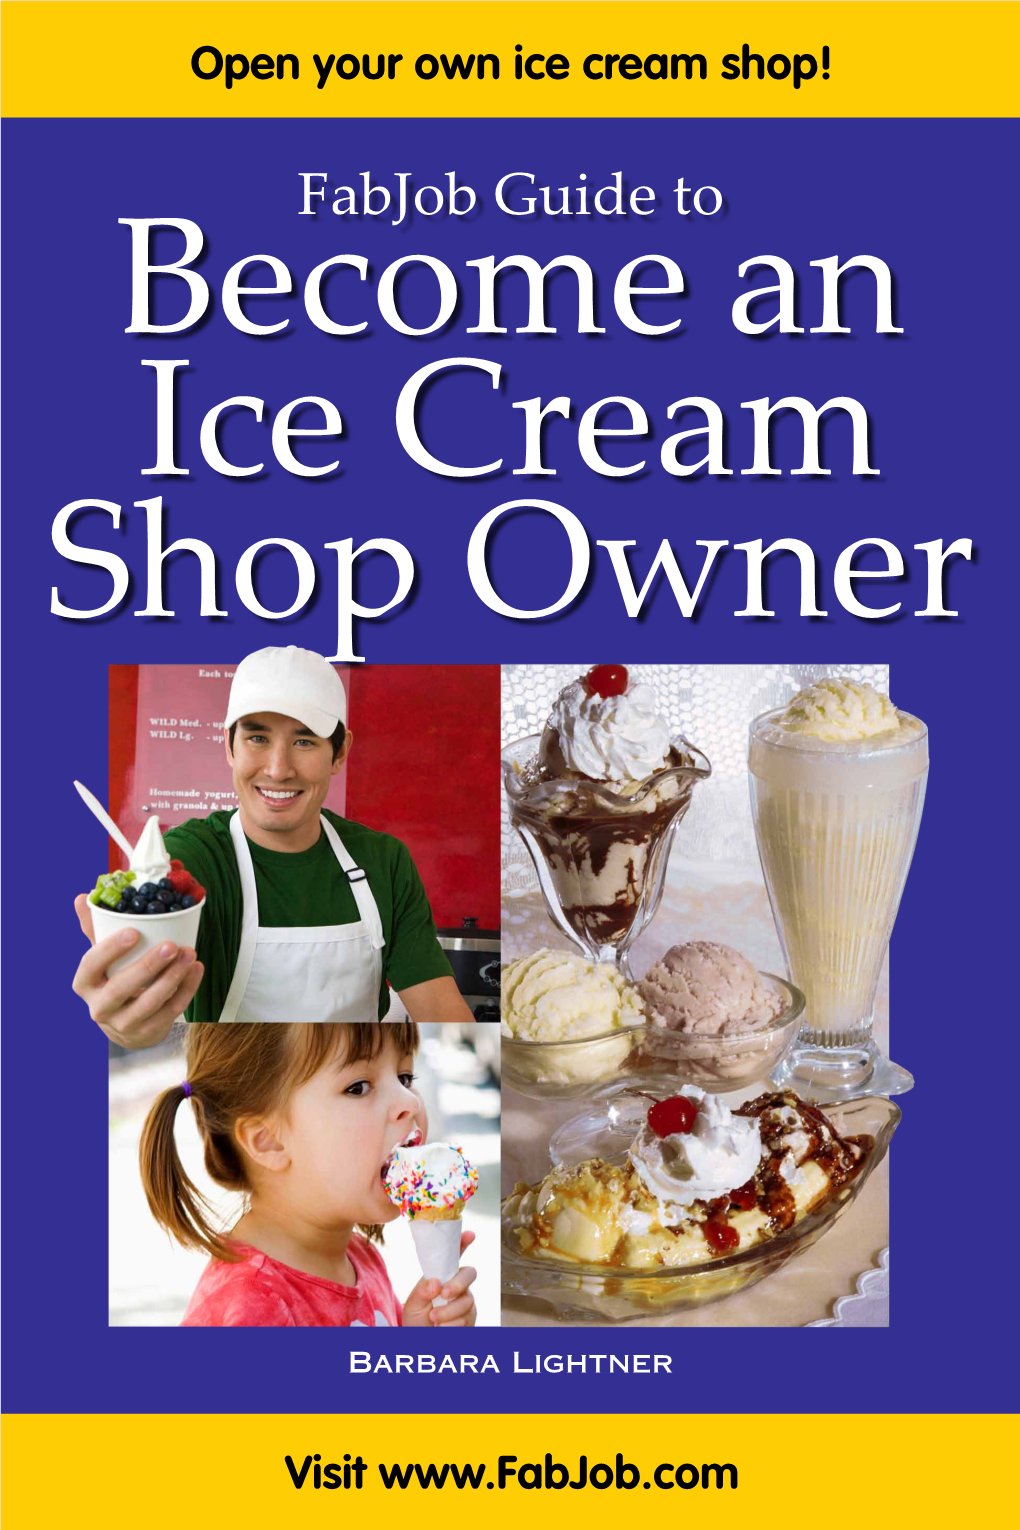 Fabjob Guide to Become an Ice Cream Shop Owner